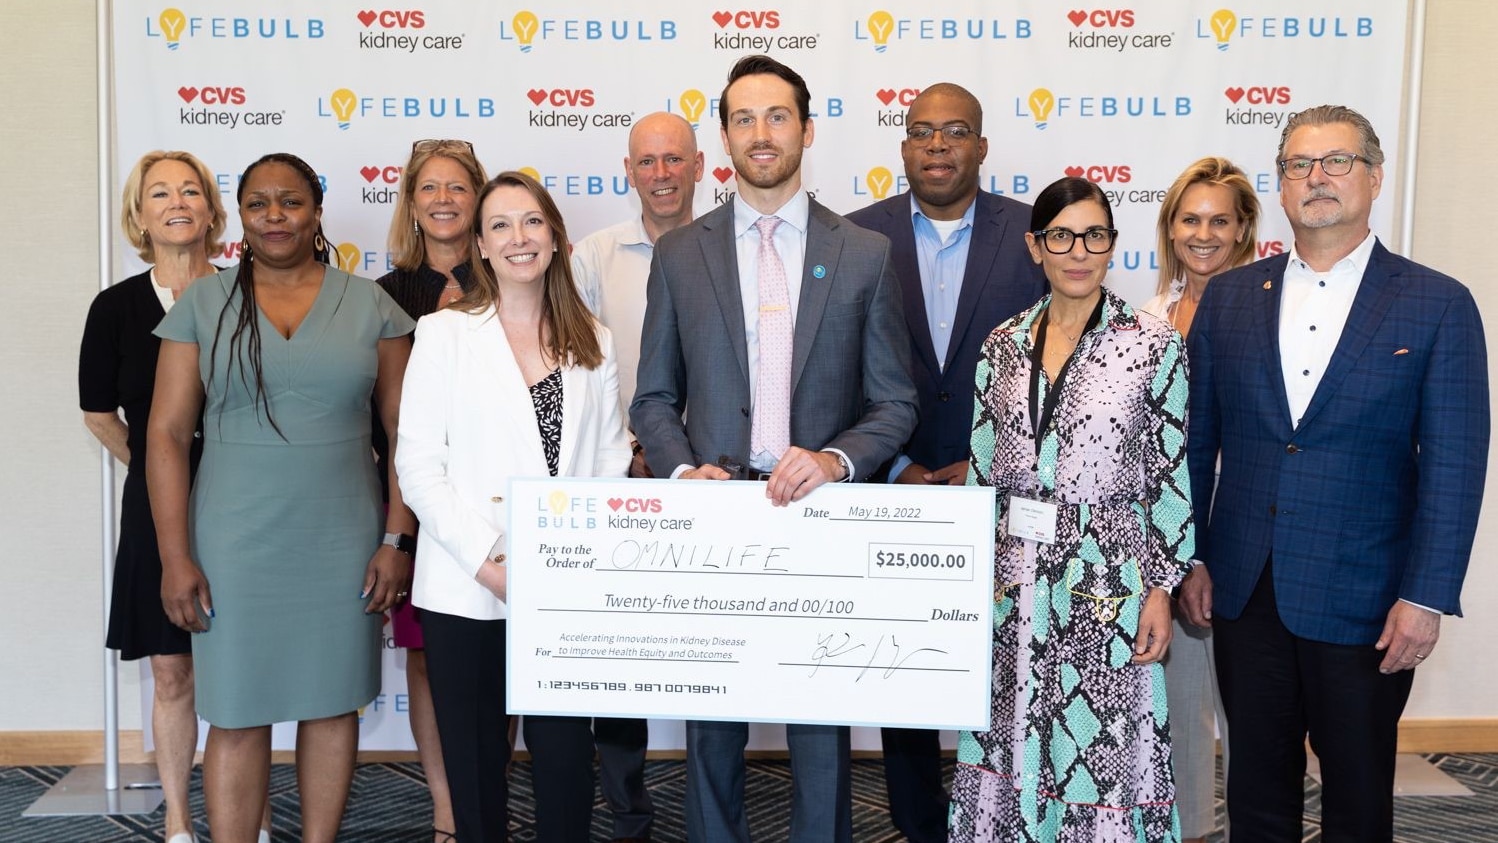 Omnilife team receiving giant check award at the 2022 Lyfebulb–CVS Kidney Care® Innovation Challenge